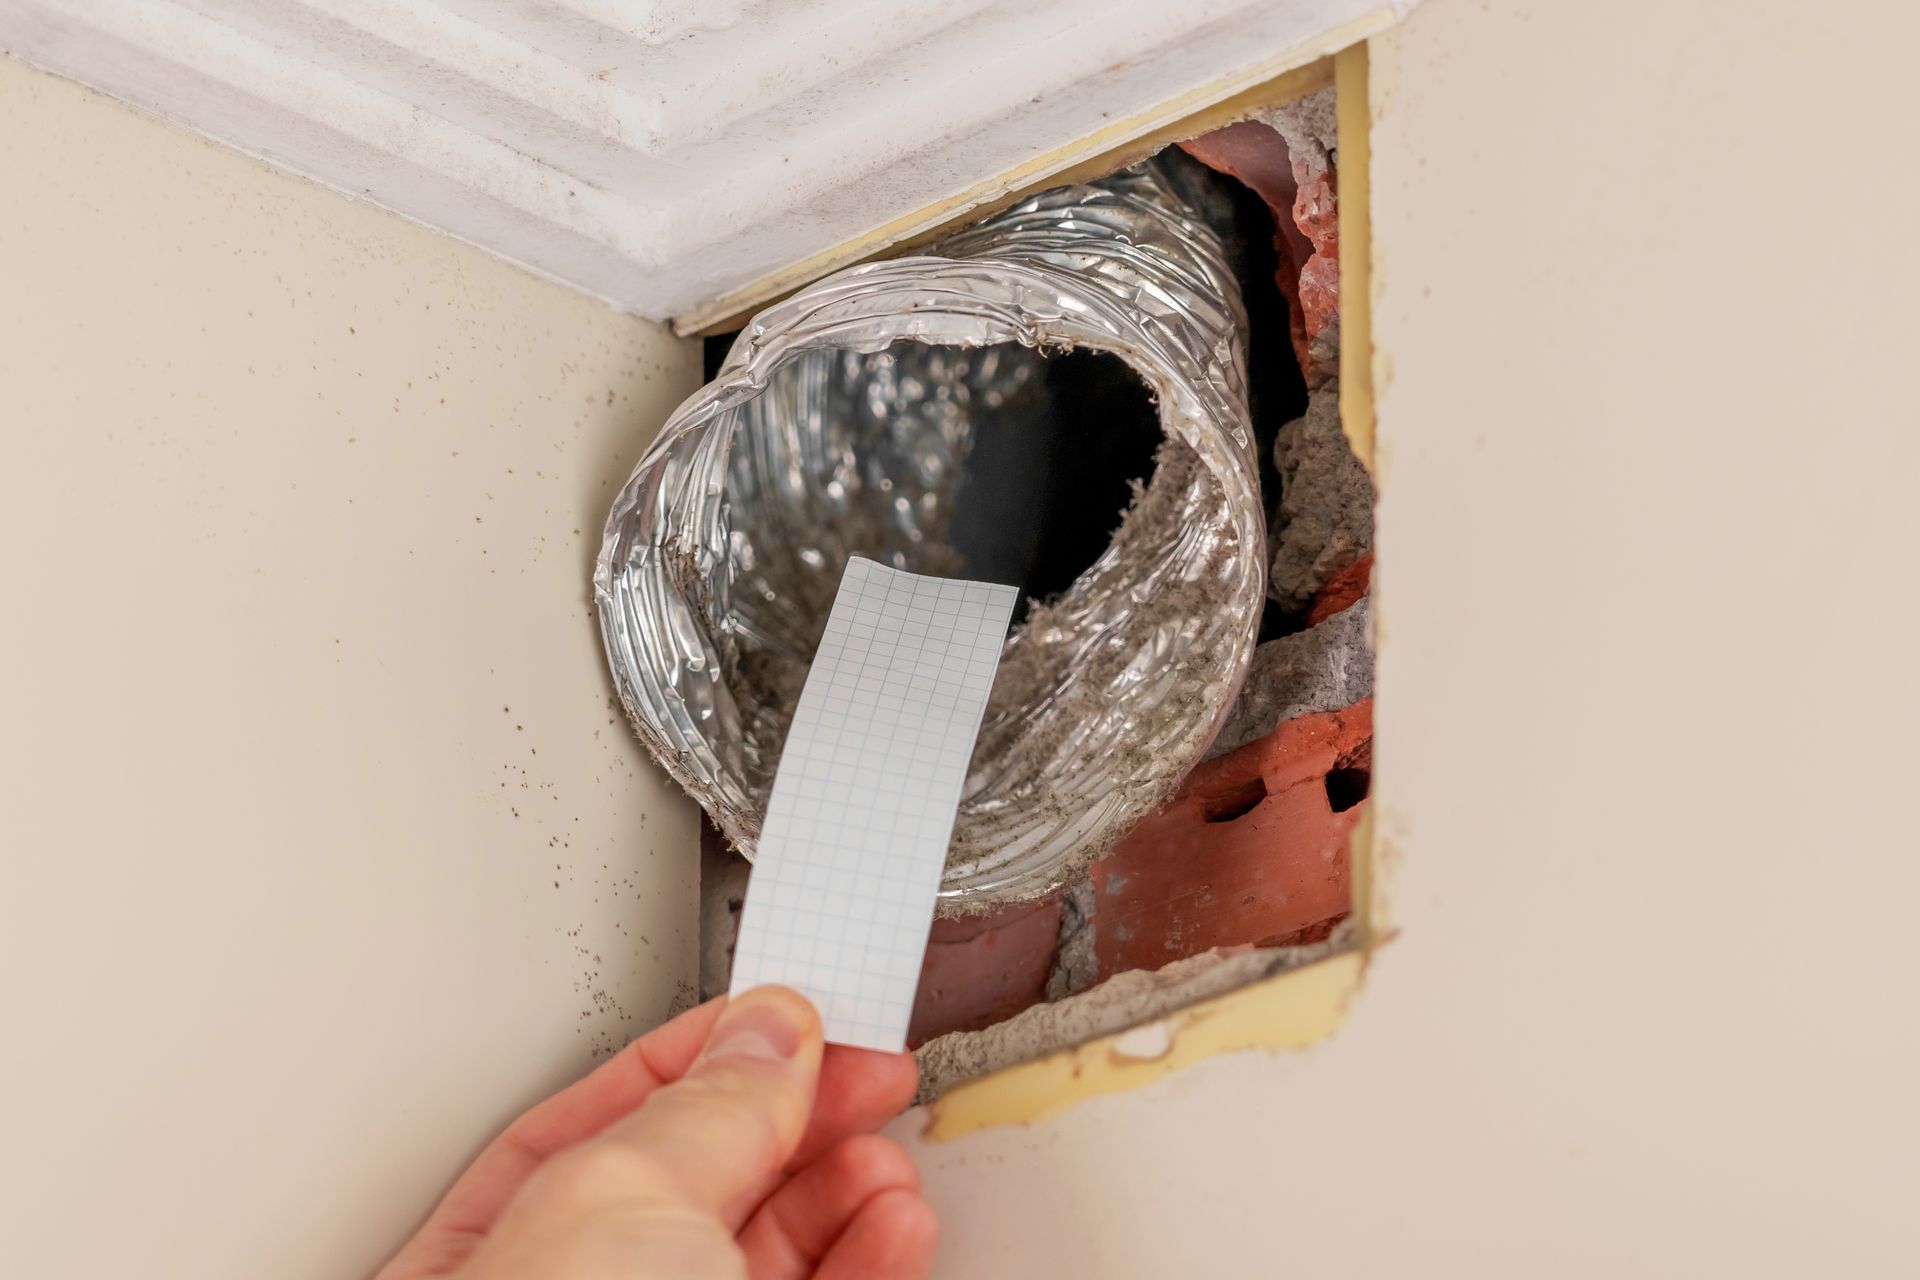 Dryer vent line showing significant accumulation of lint and dust, indicating the need for HVAC duct cleaning.